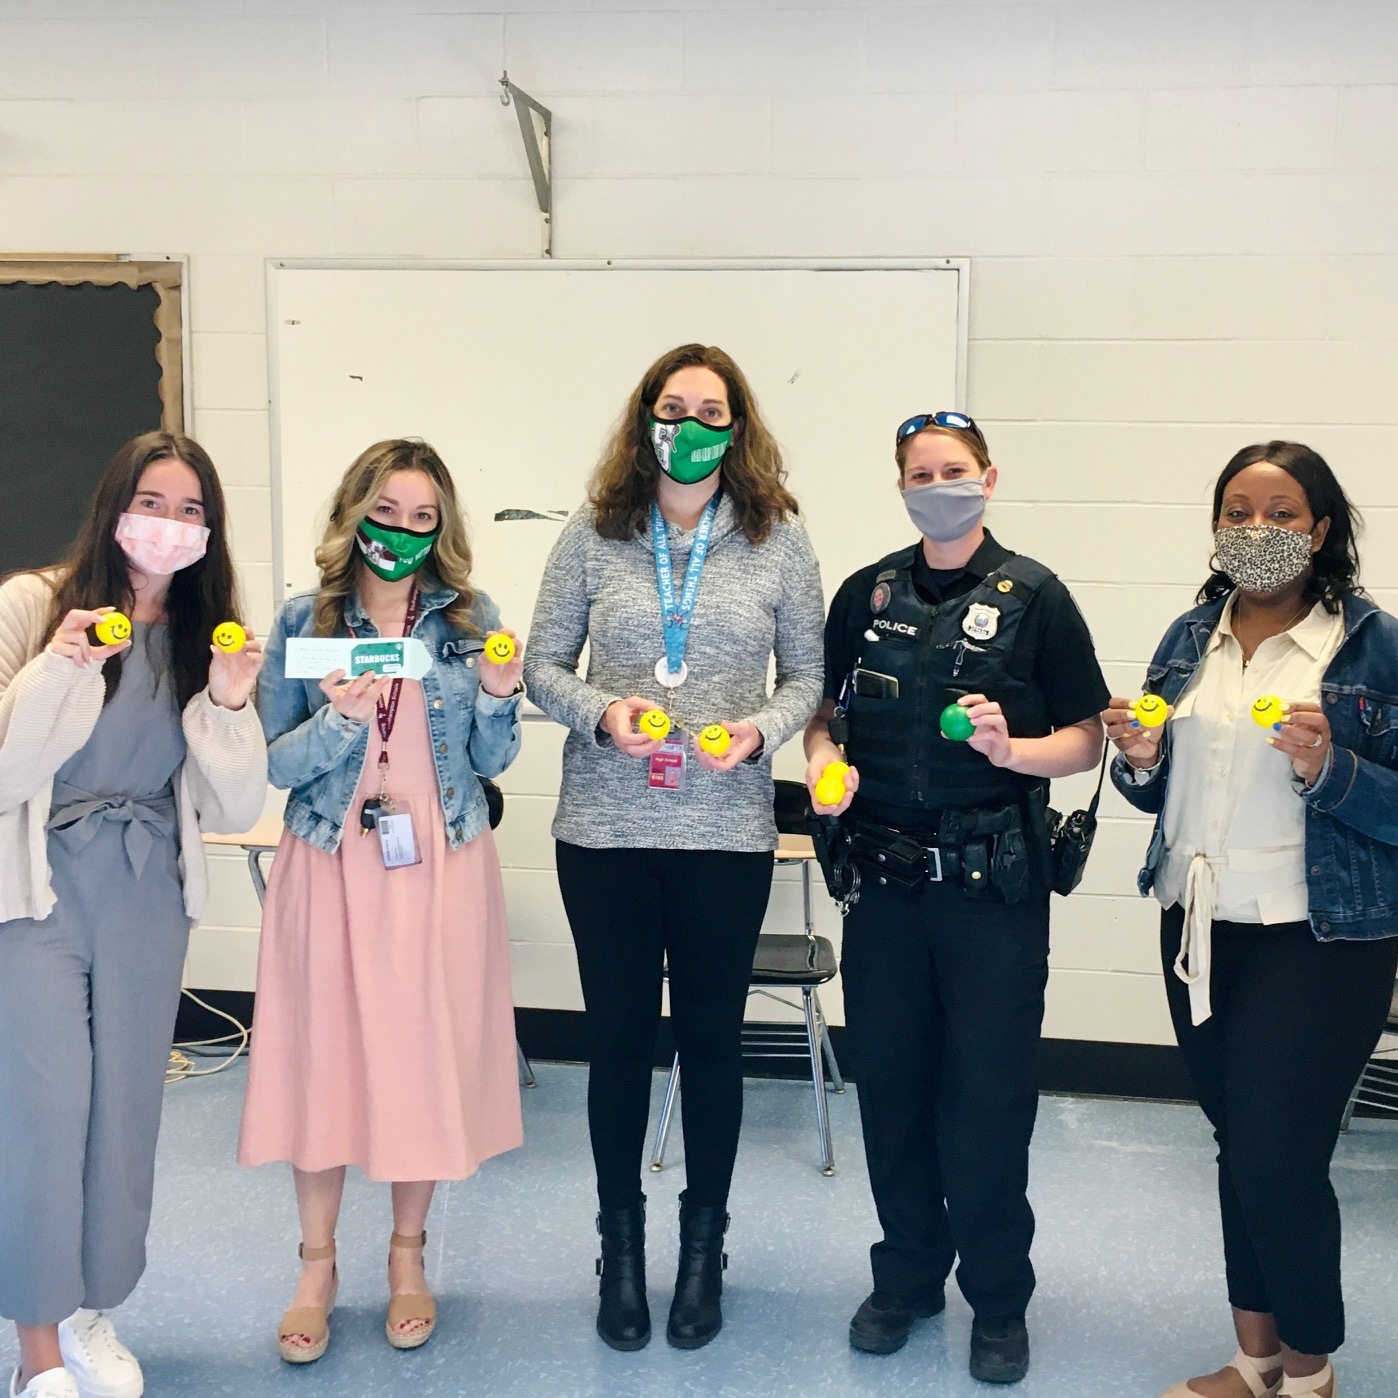 Brooke Ross, Arlette Flores, Kimberly Spellman-McClain, Lisa McCulley and Natasha Jeffries hold stress balls used in the scavenger hunt promoting mental health awareness at Southampton High School.